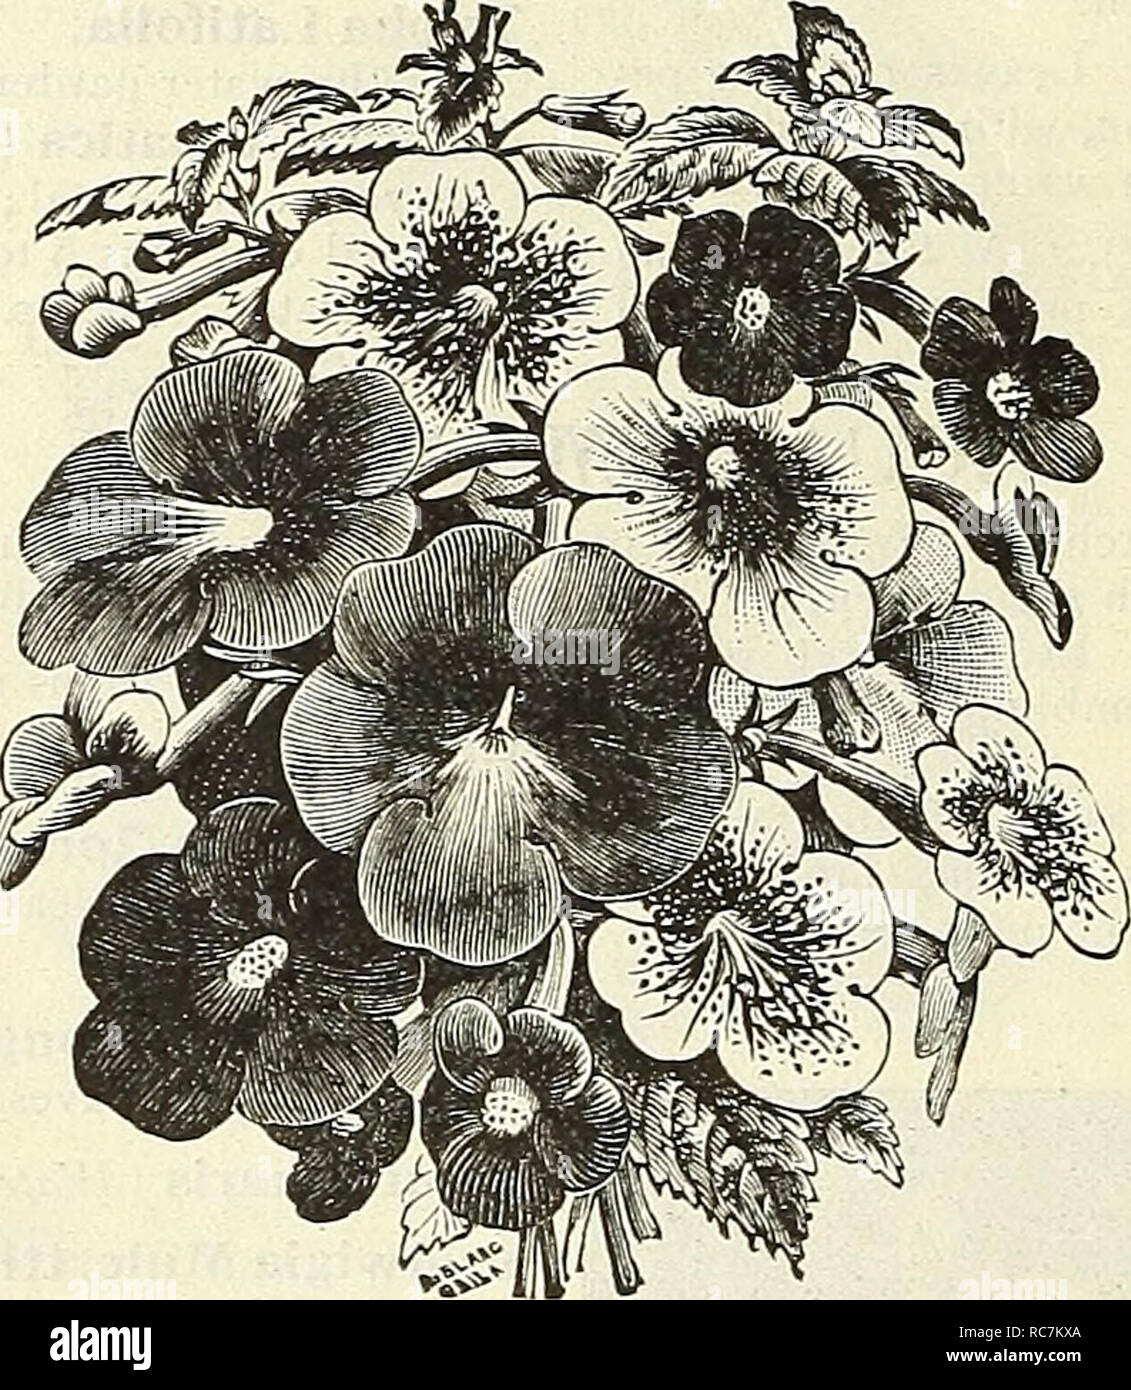 . Dreer's garden calendar : 1903. Seeds Catalogs; Nursery stock Catalogs; Gardening Equipment and supplies Catalogs; Flowers Seeds Catalogs; Vegetables Seeds Catalogs; Fruit Seeds Catalogs. Abelia Floribunda. ACACIA. Armata. A most desirable house plant, succeeding under the same con- ditions as an Azalea or Camellia ; the bright canary-yellow globular flowers are produced in March and April; very effective. 50 cts. and §1.00 each. ACHIMENES. Tropical plants for summer blooming; [ the scaly tubers must be preserved en- tirely dry during the winter. In early spring pot in peat, sand and a littl Stock Photo